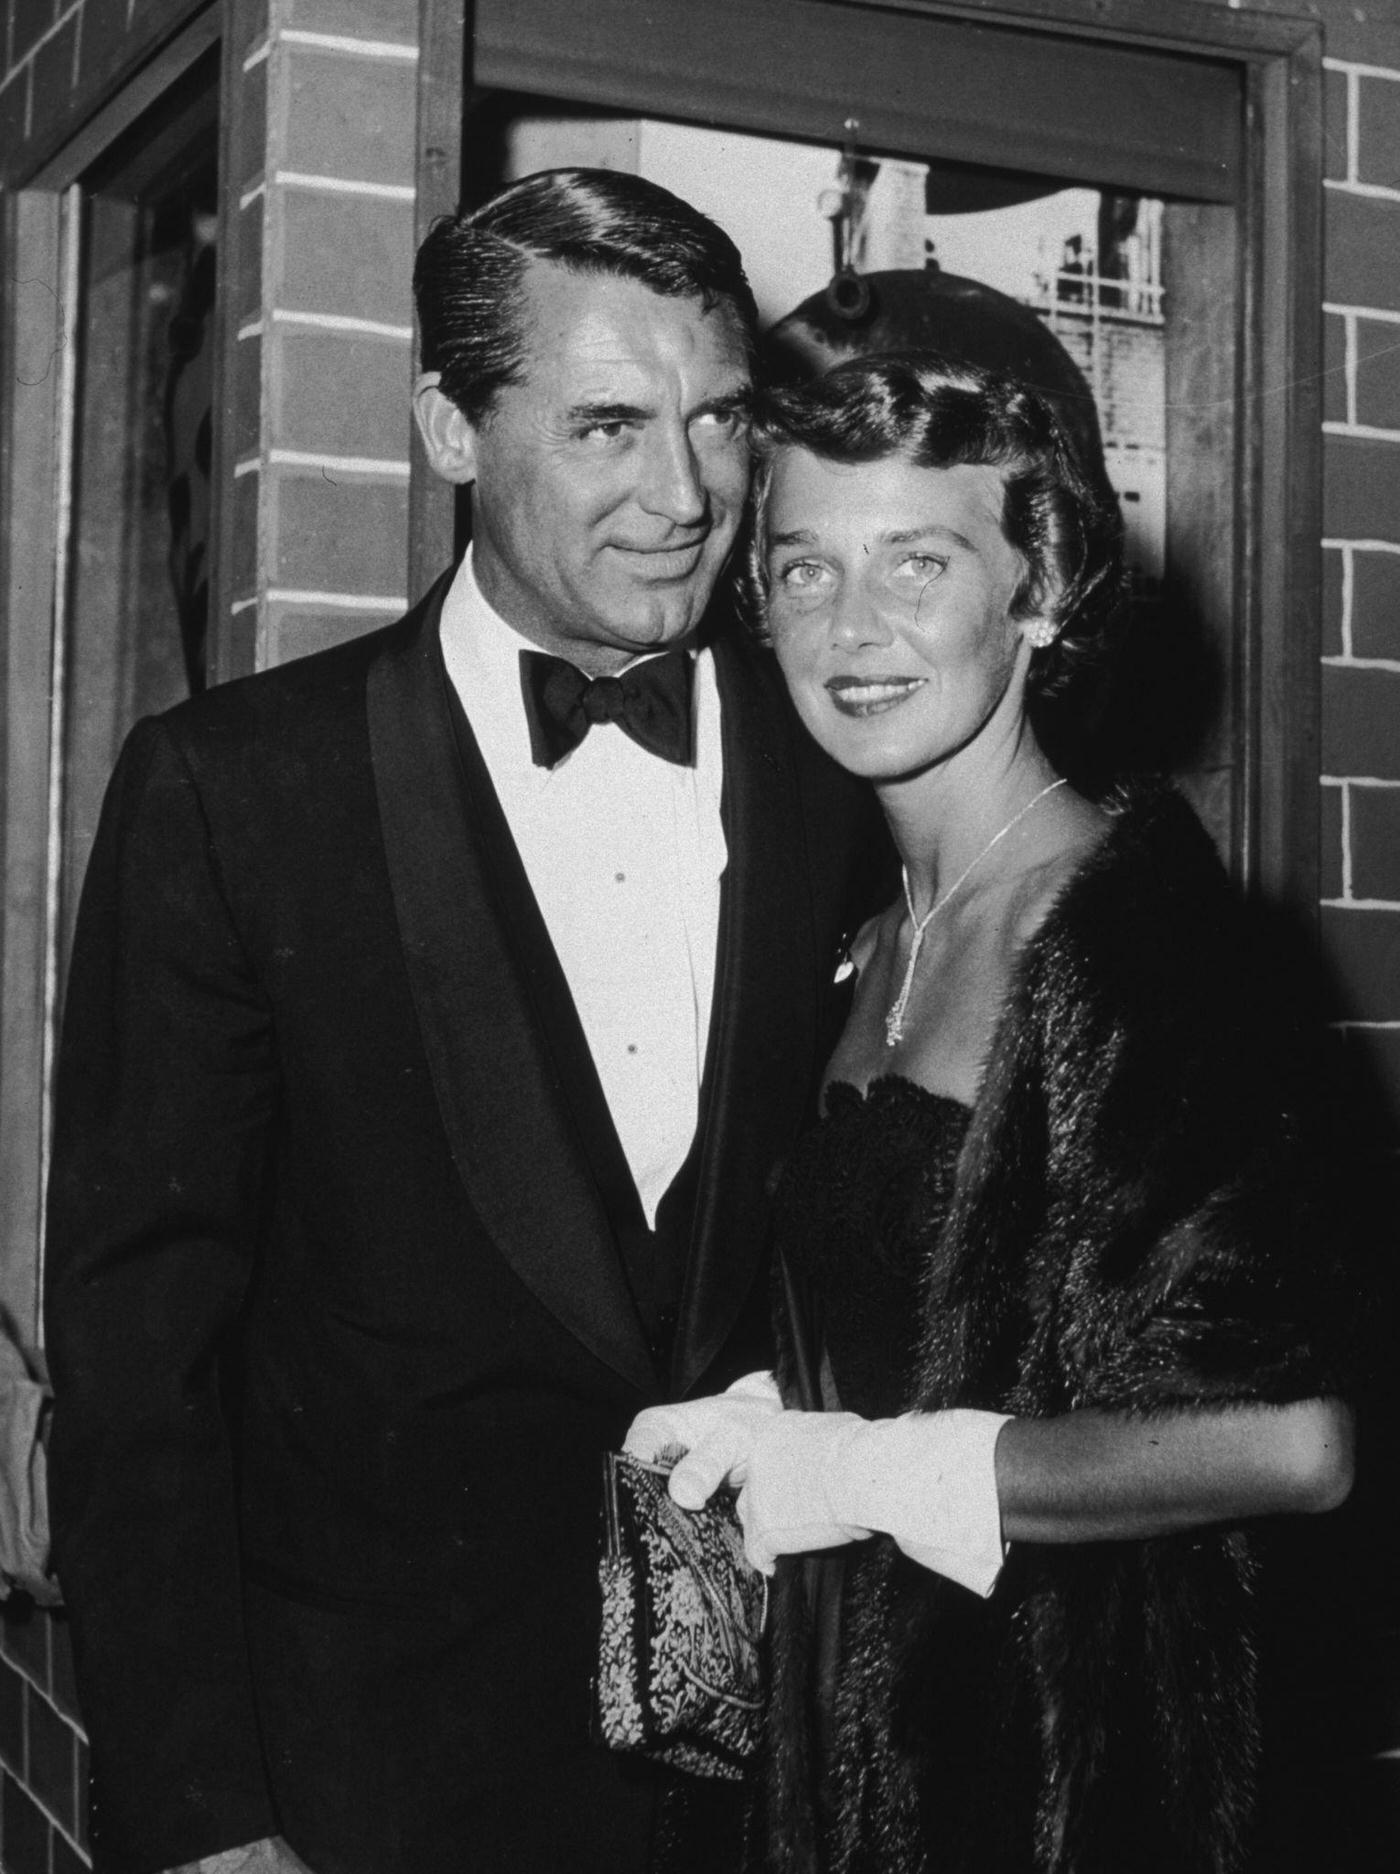 Cary Grant and his third wife, Betsy Drake, pose outside a theater while attending the premiere of 'Rear Window,'